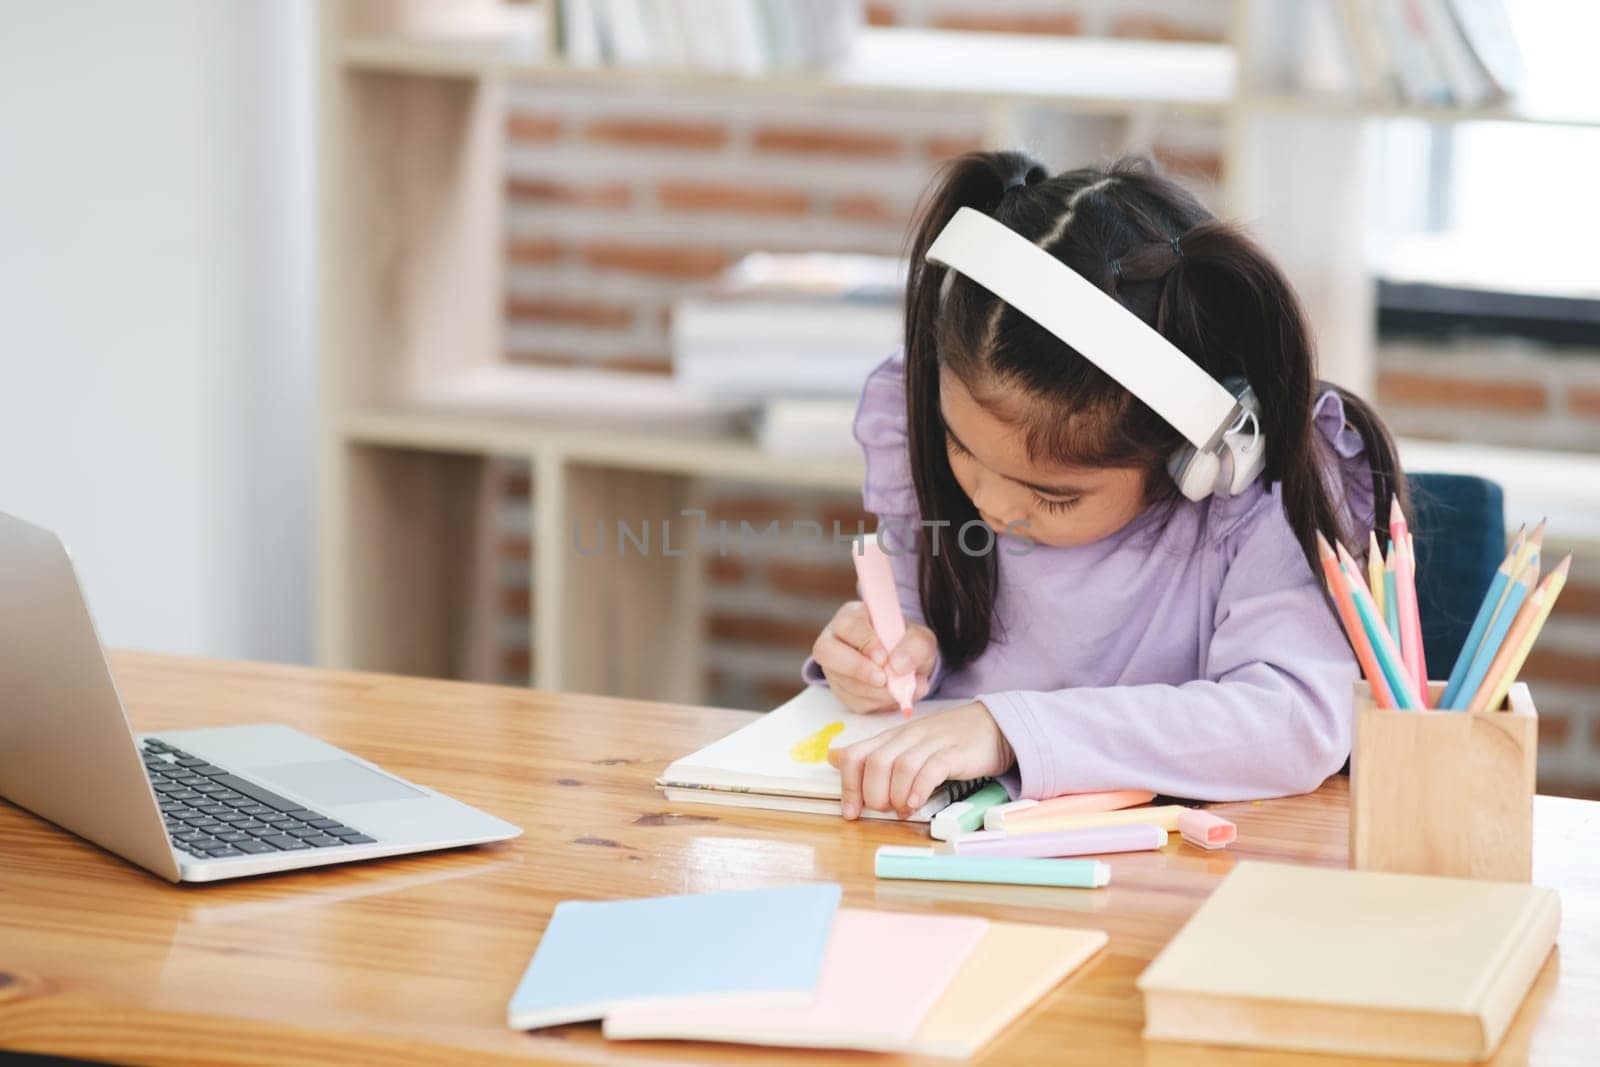 A young girl is sitting at a desk with a laptop and a notebook by ijeab